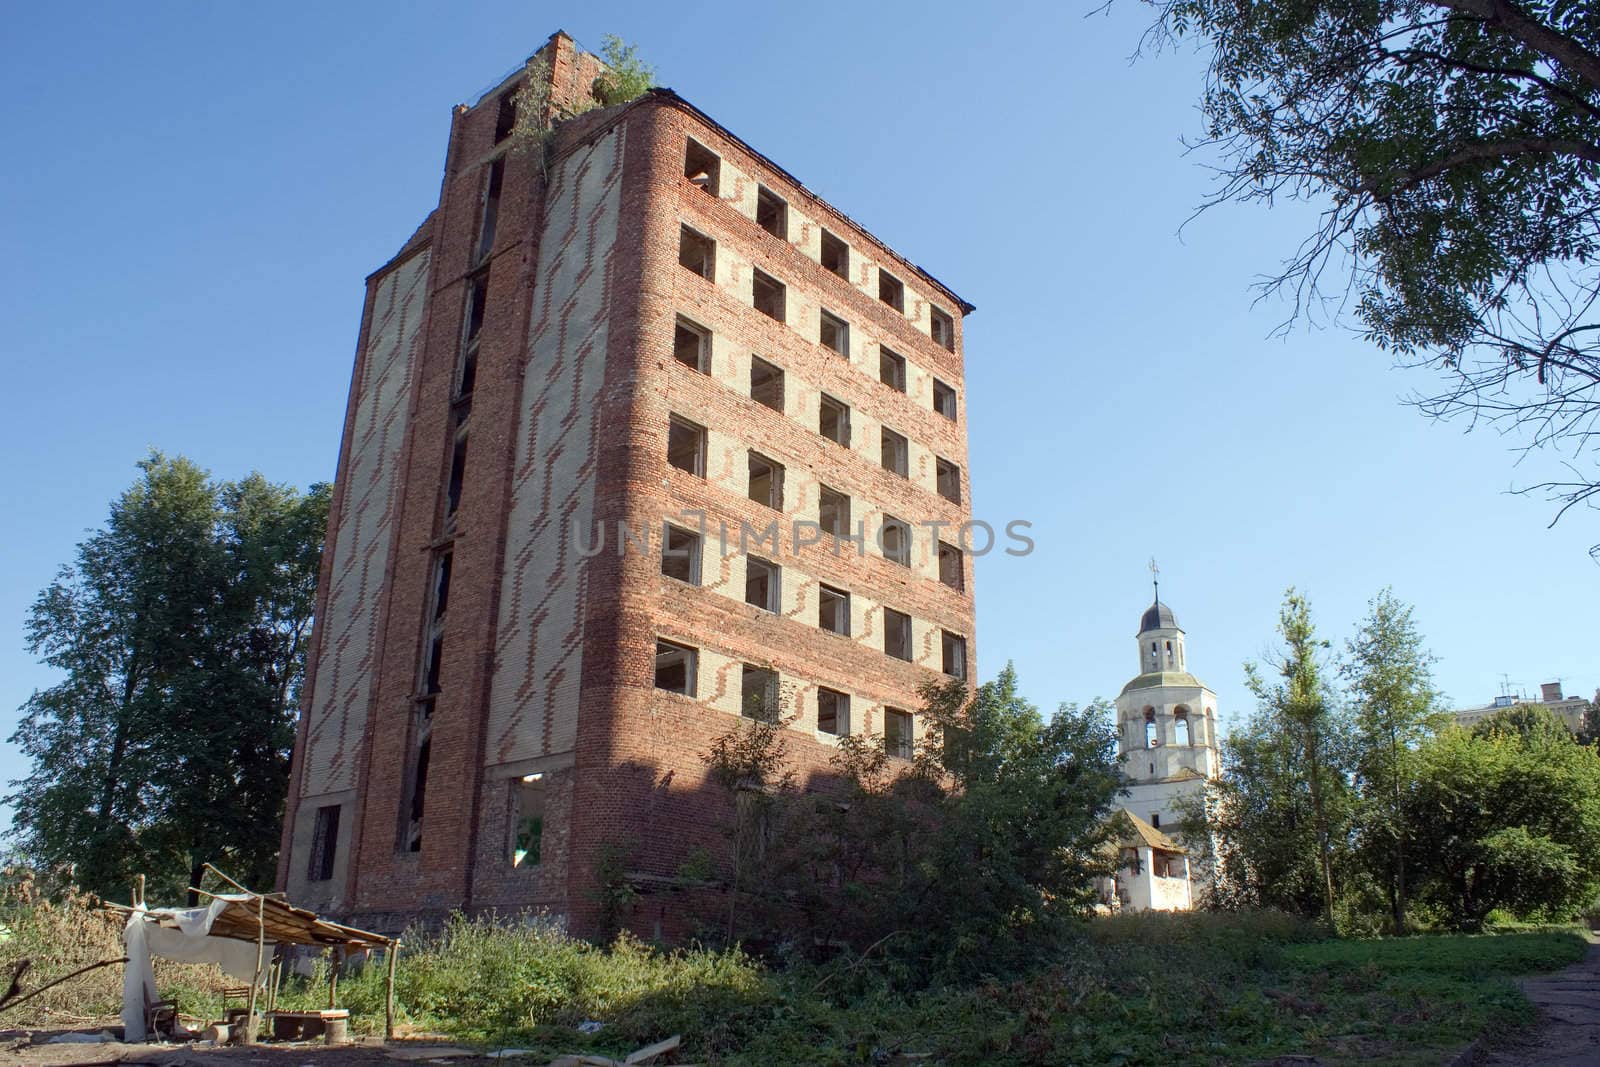 The abandoned residential building of the Communa in Smolensk, Russia